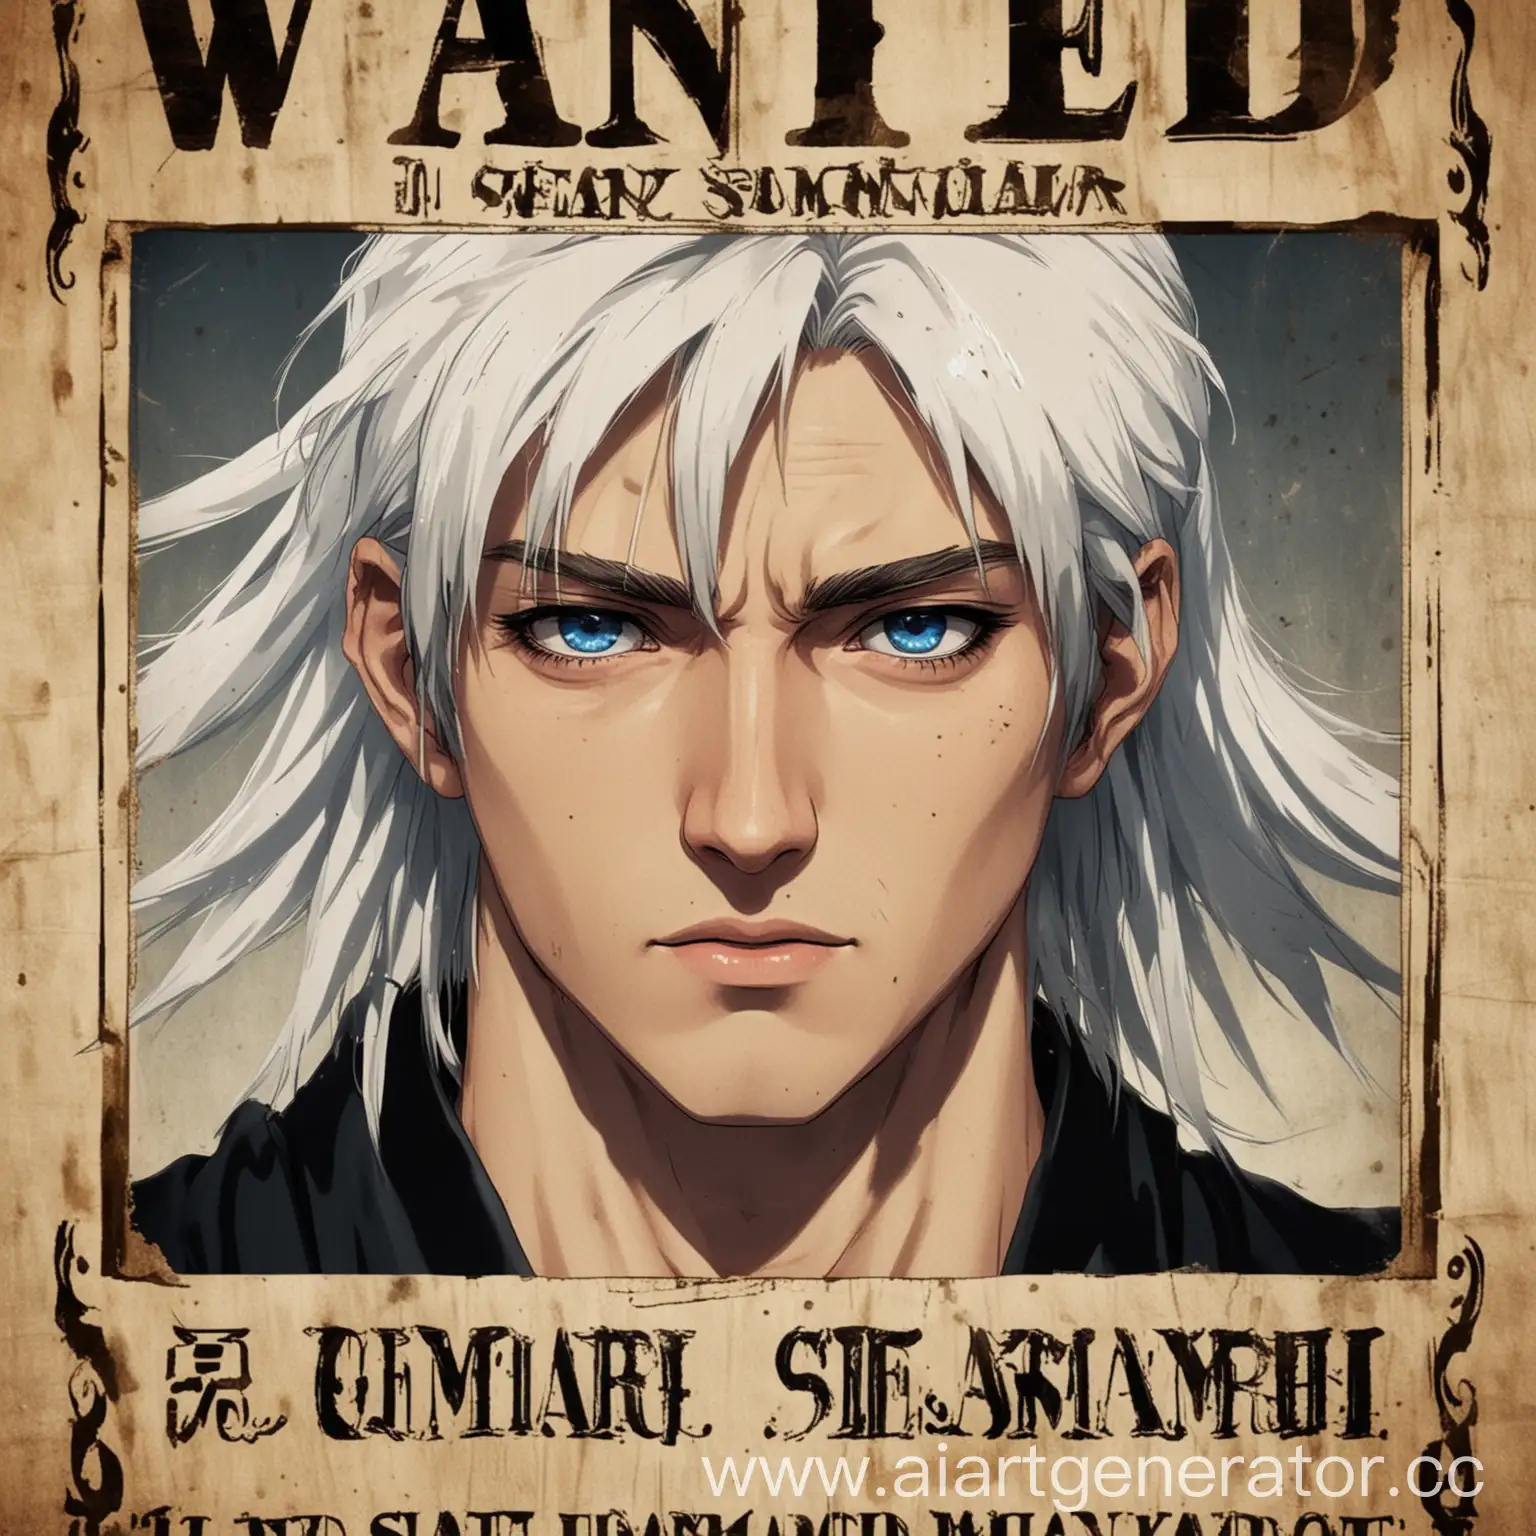 Wanted-Poster-20YearOld-WhiteHaired-Samurai-with-Blue-Eyes-Anime-Style